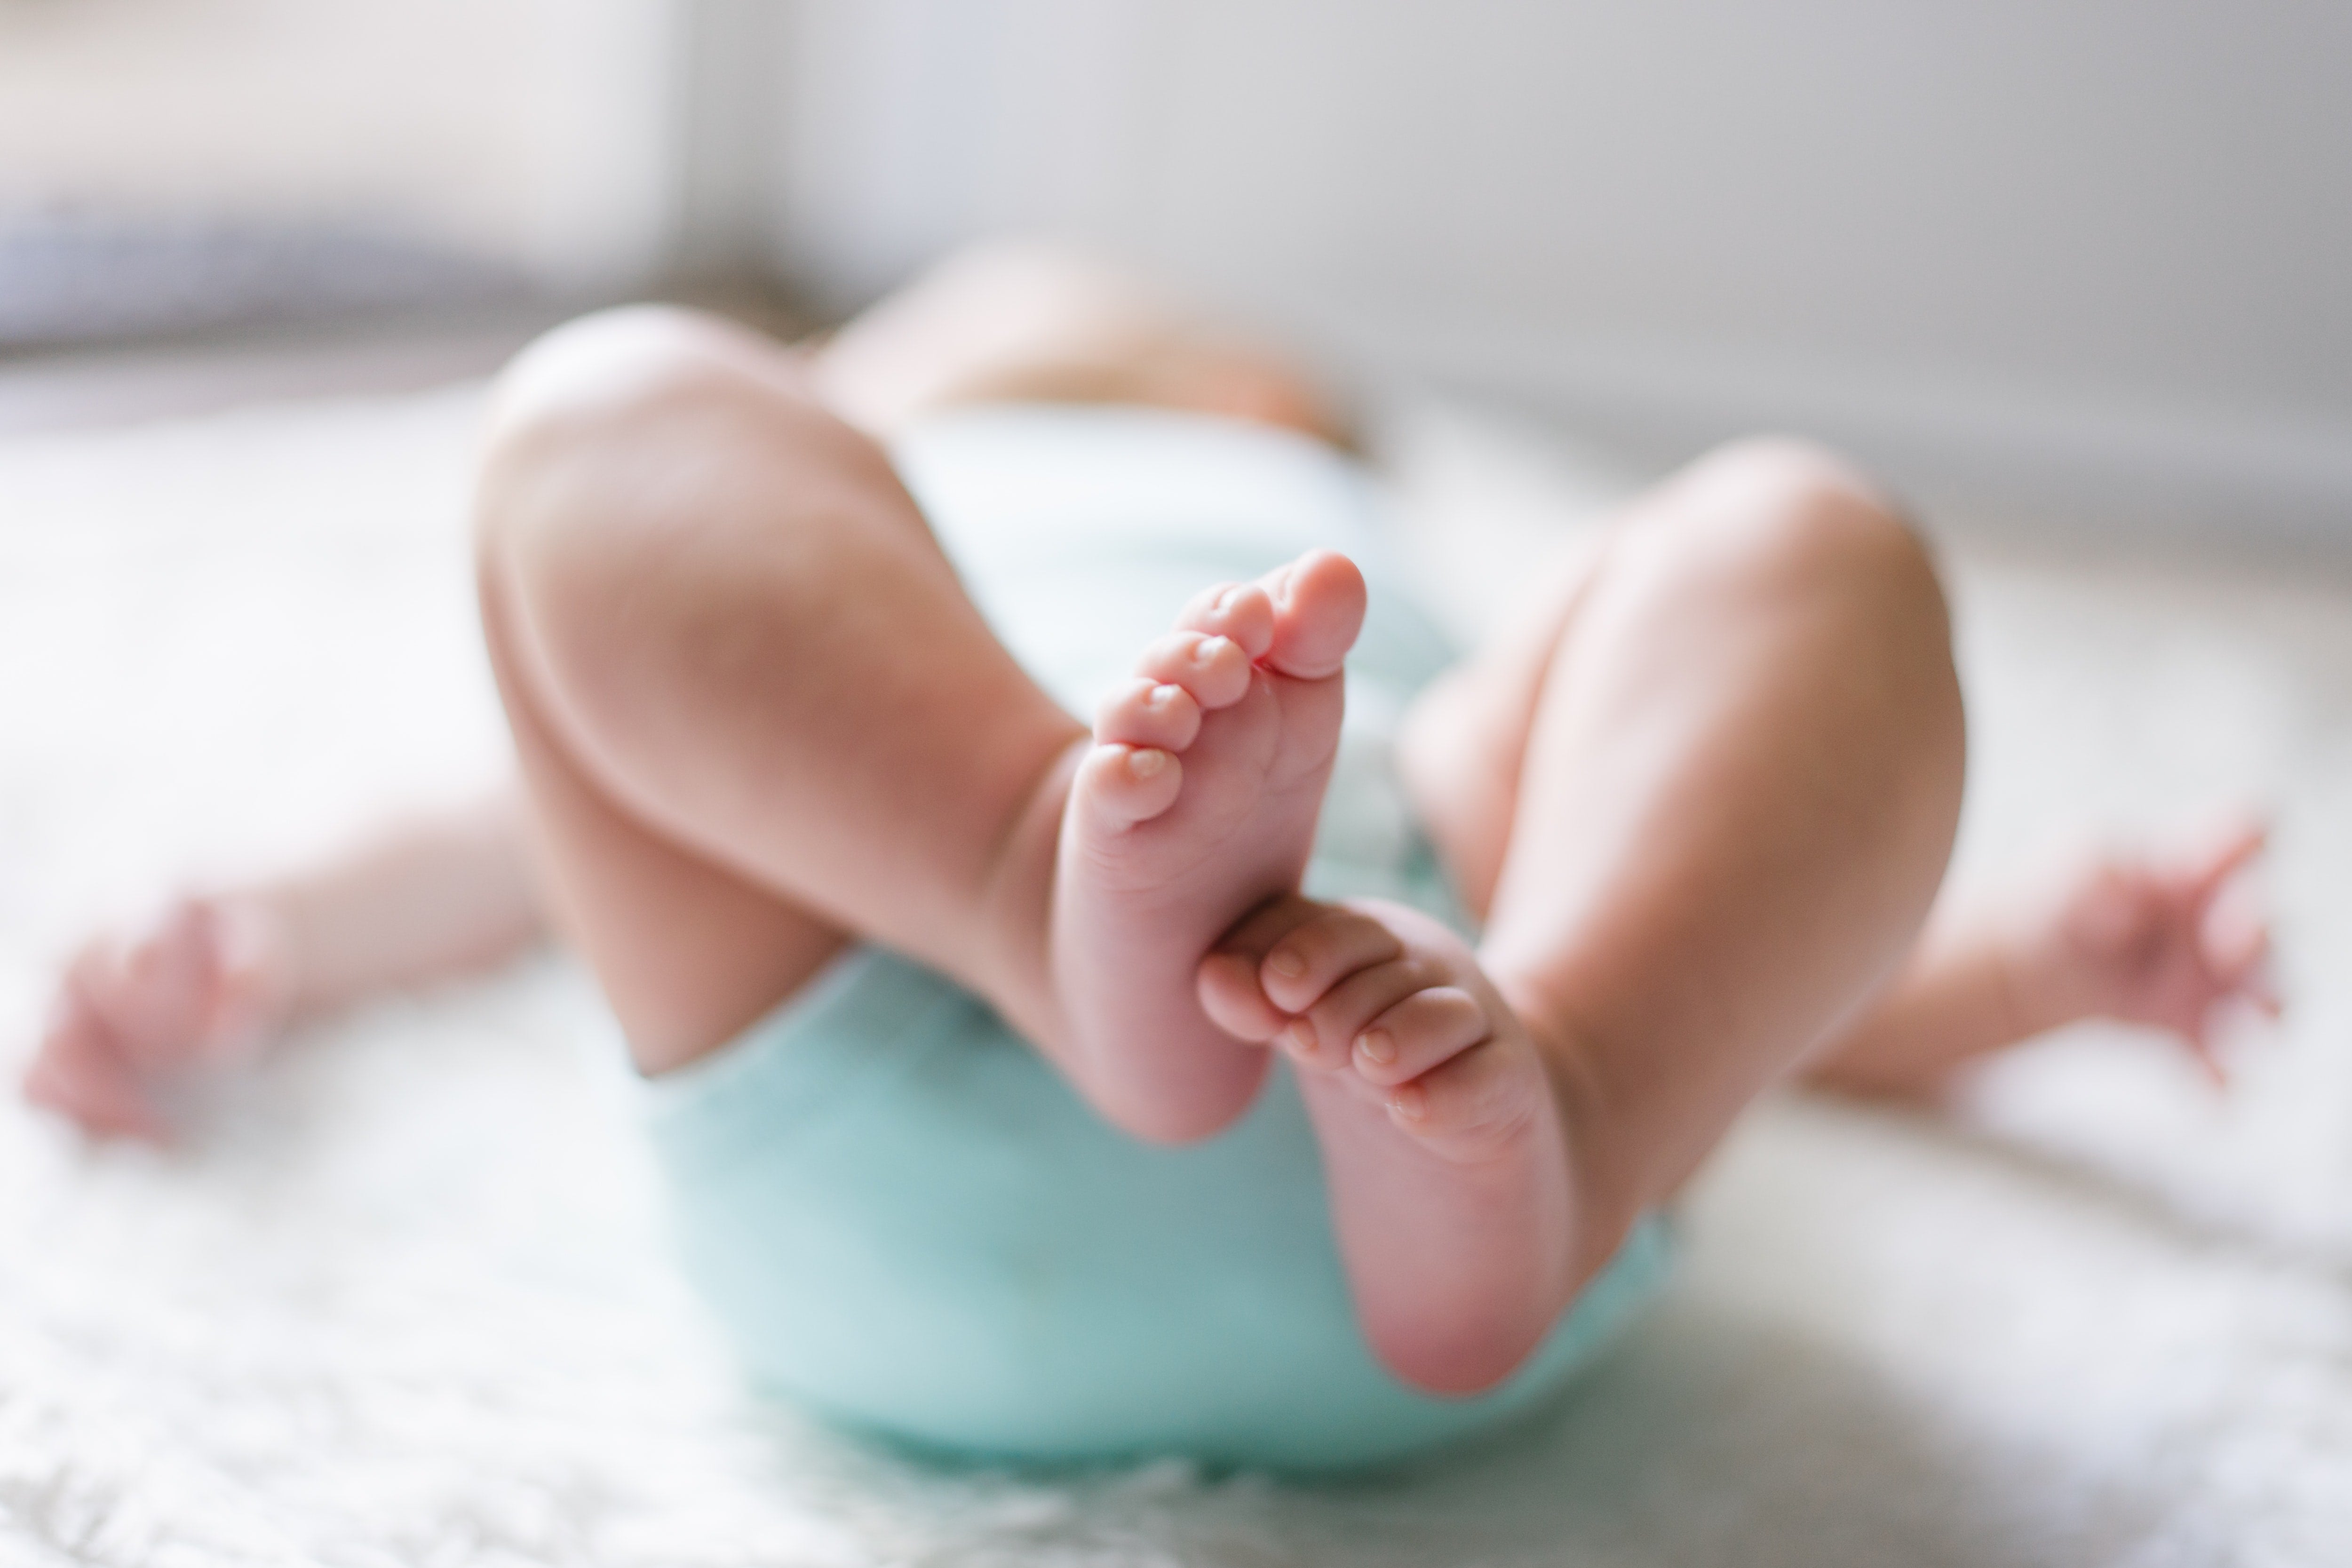 A baby lying down on a white blanket. Only the baby's feet are clearly visible, the rest of the baby is out of focus. 